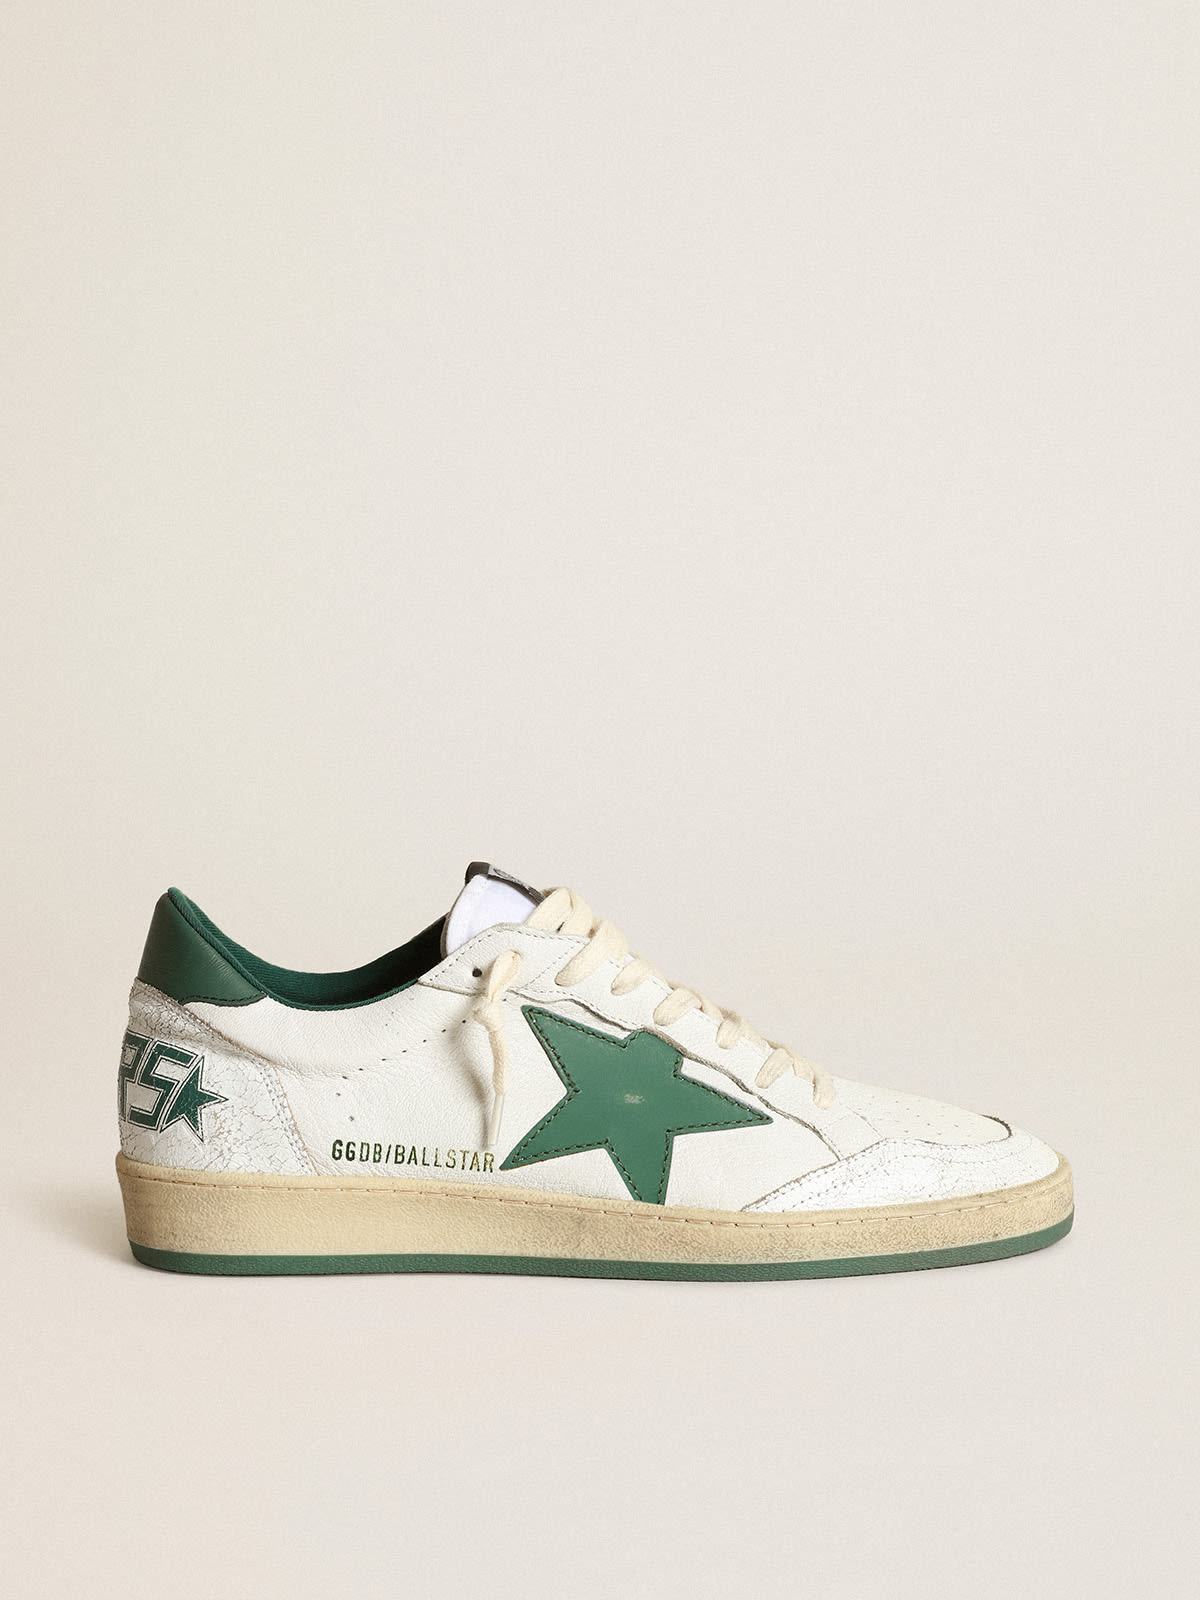 Golden Goose - Ball Star sneakers in white nappa leather with mat green leather star and heel tab in 